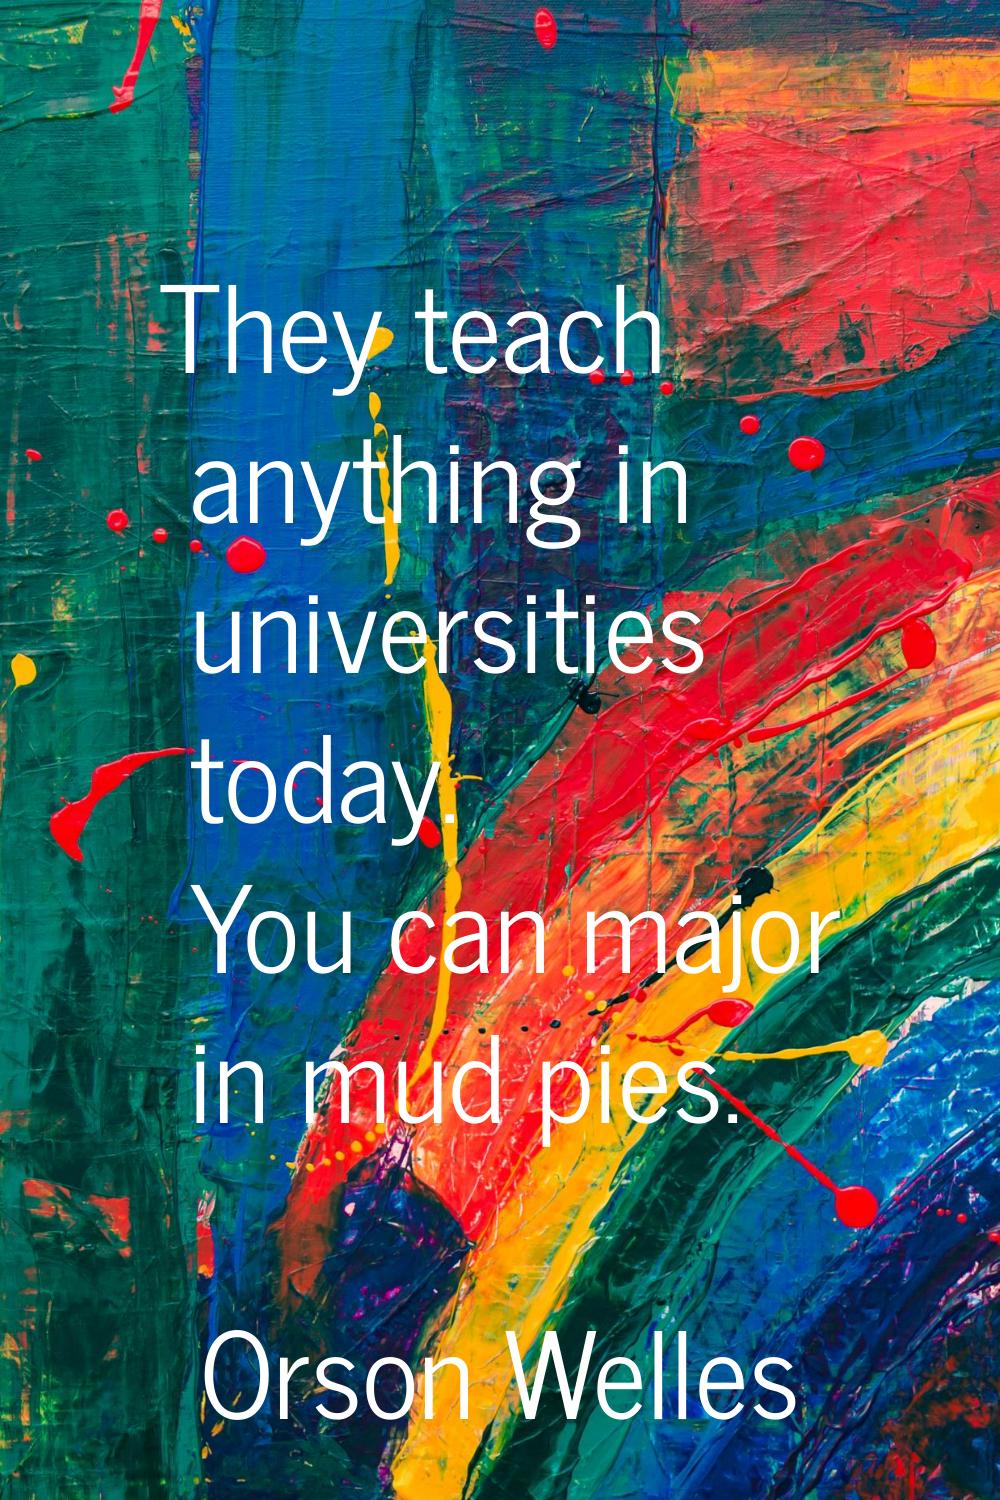 They teach anything in universities today. You can major in mud pies.